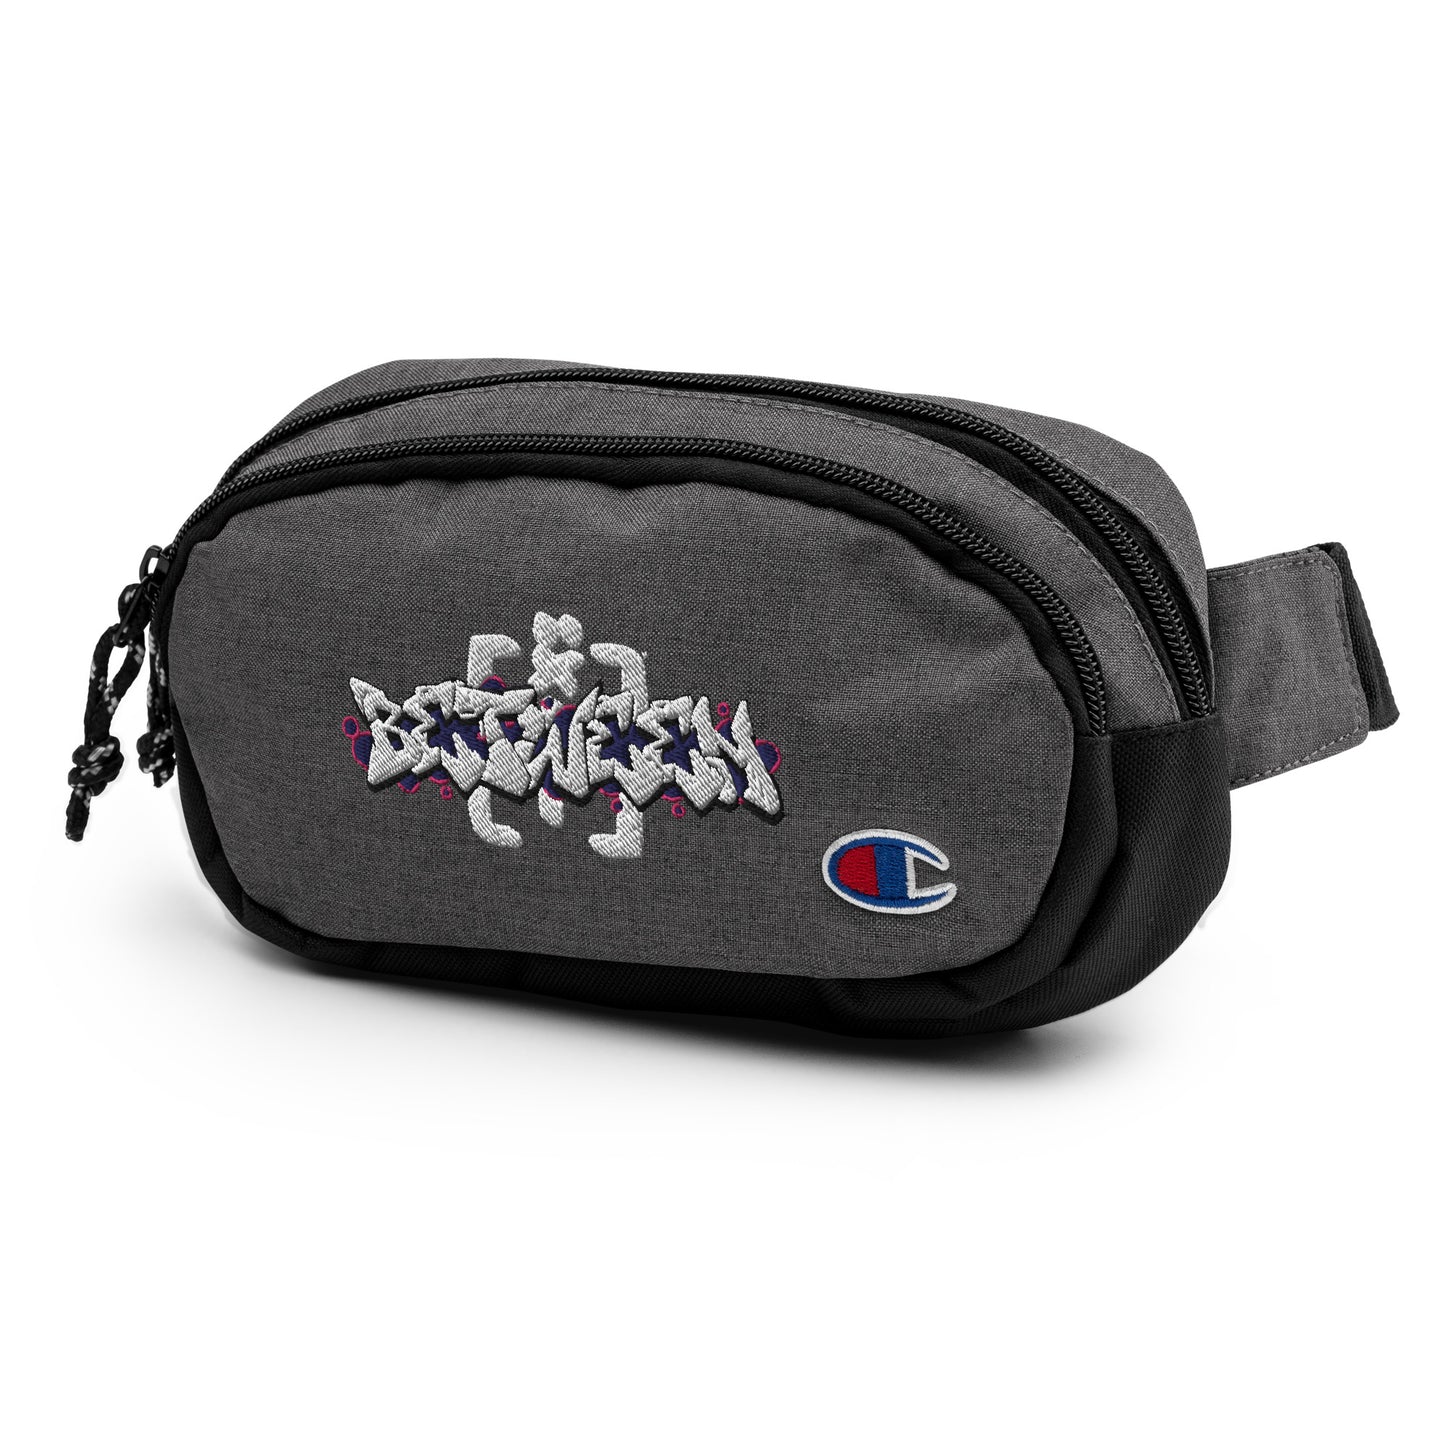 [Graffiti is Good] [Between the Lines] x Champion Fanny Pack